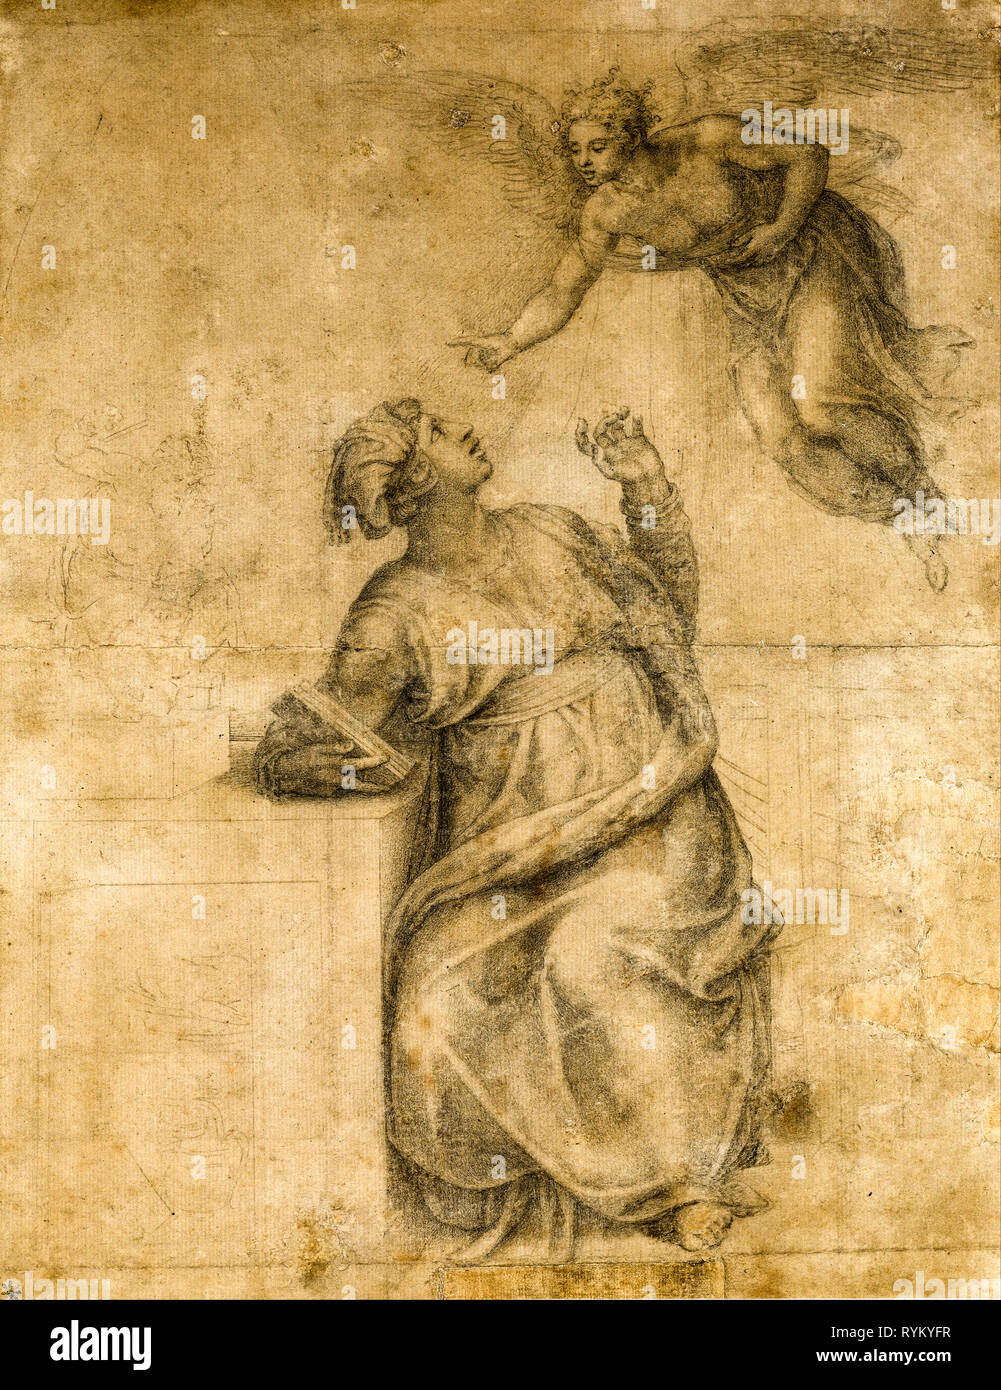 Annunciation to the Virgin, c. 1530, Michelangelo drawing Stock Photo